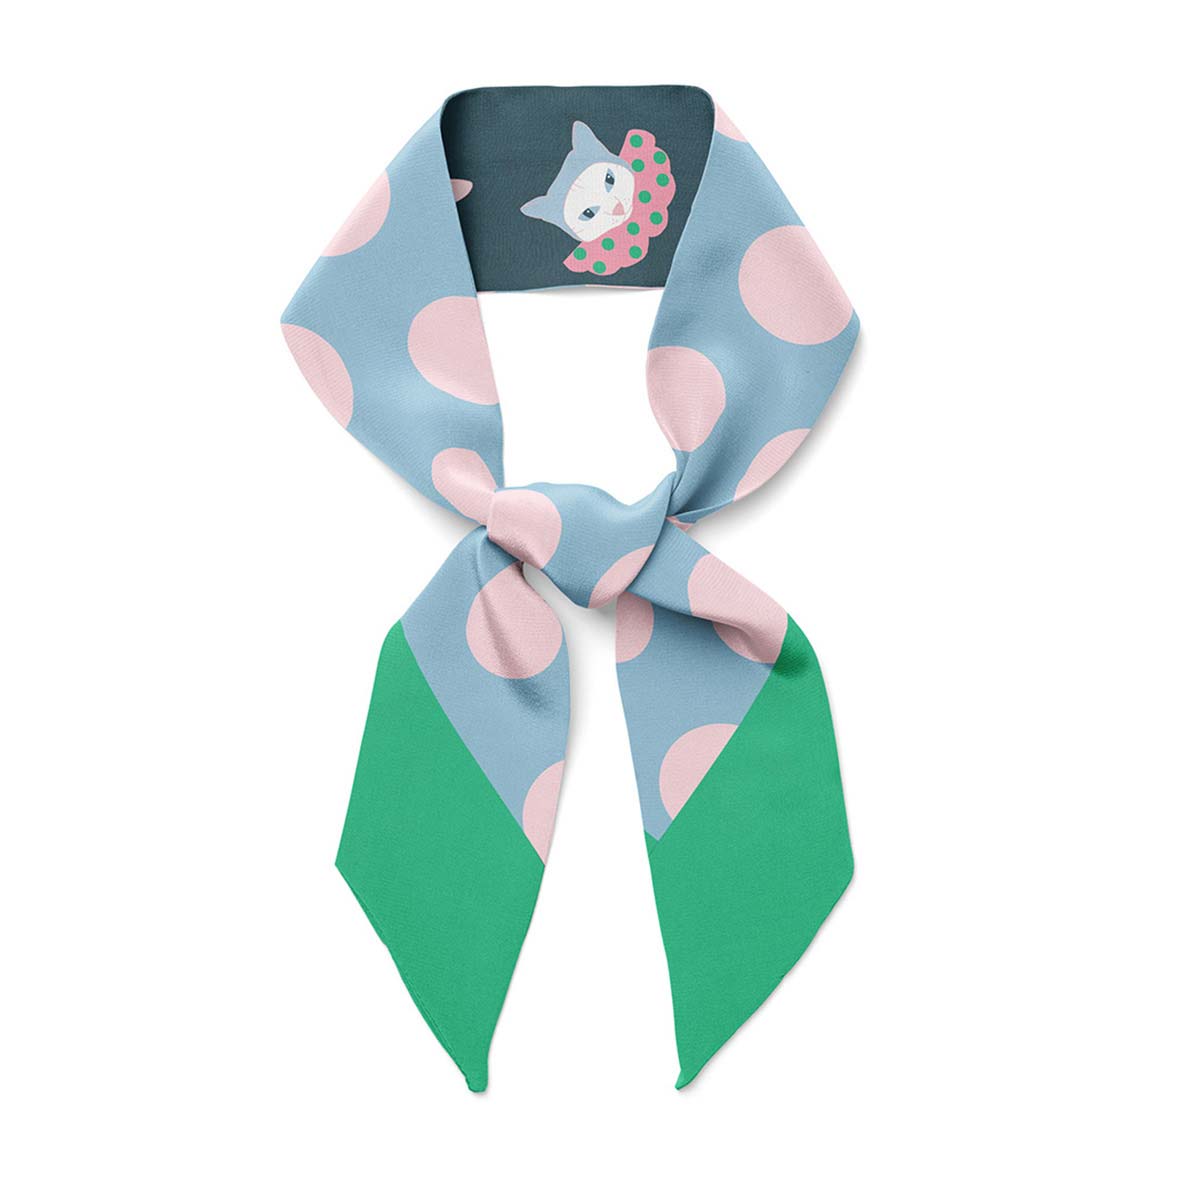 Pink polka dots on blue twilly bow ribbon silk scarf with cat clowns.